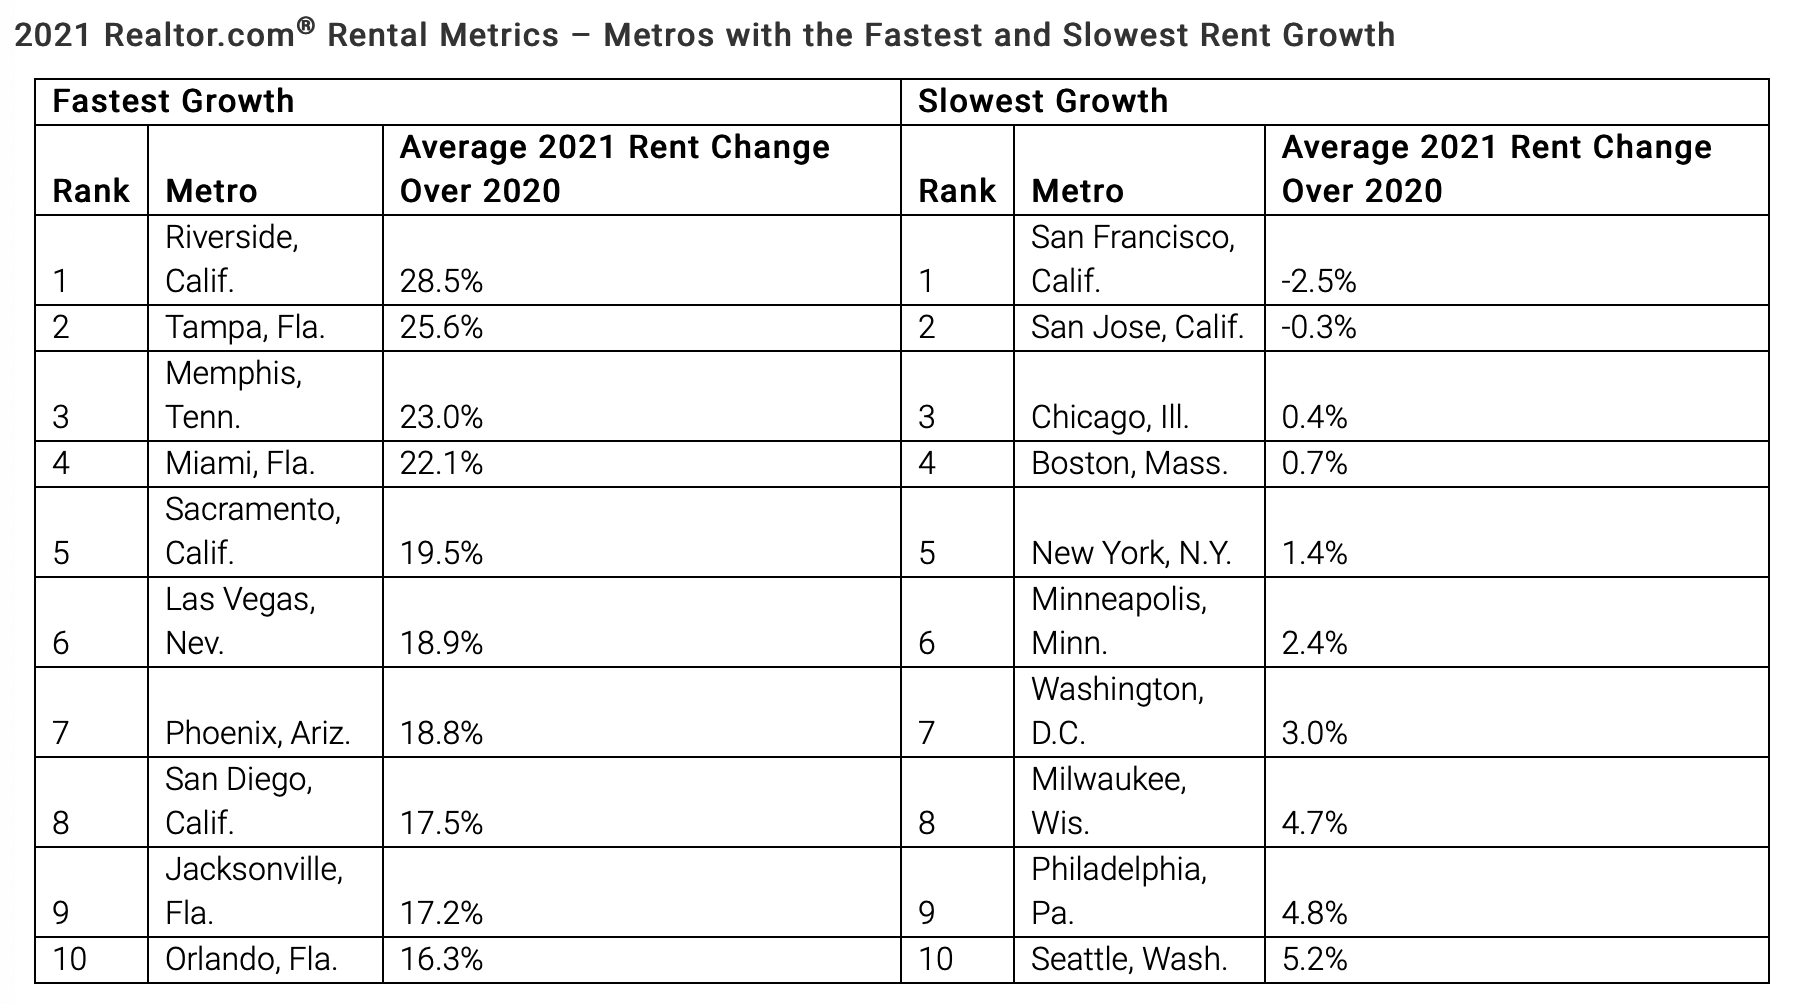 A table showing realtor.com®'s 2021 national rent metrics by the fastest and slowest growths and where they occurred. 